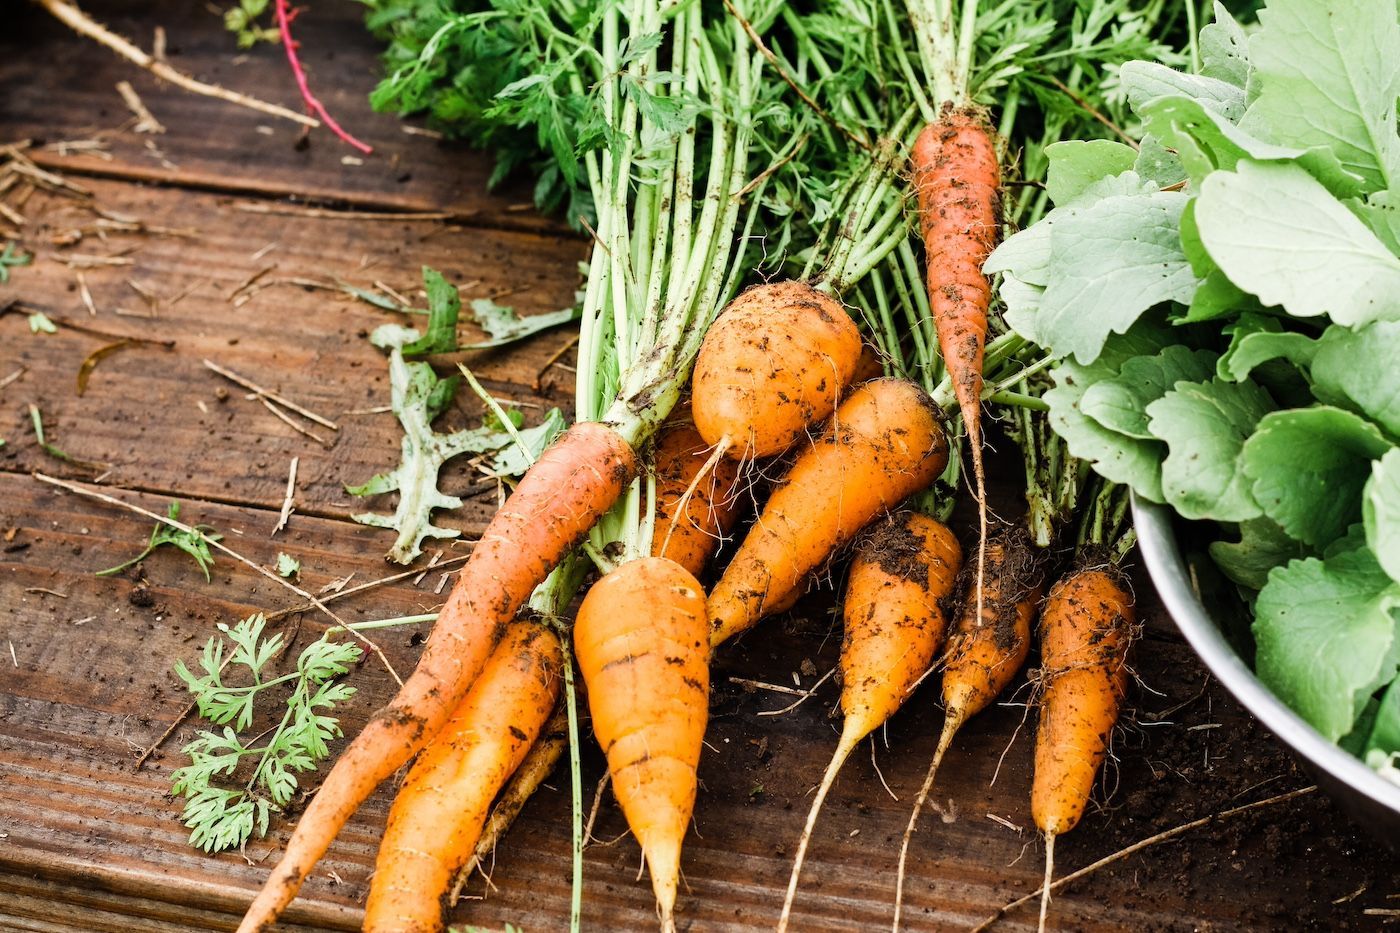 Incorporate Vitamin a Rich Foods Like Carrots to Enhance Your Wellness. Learn More.